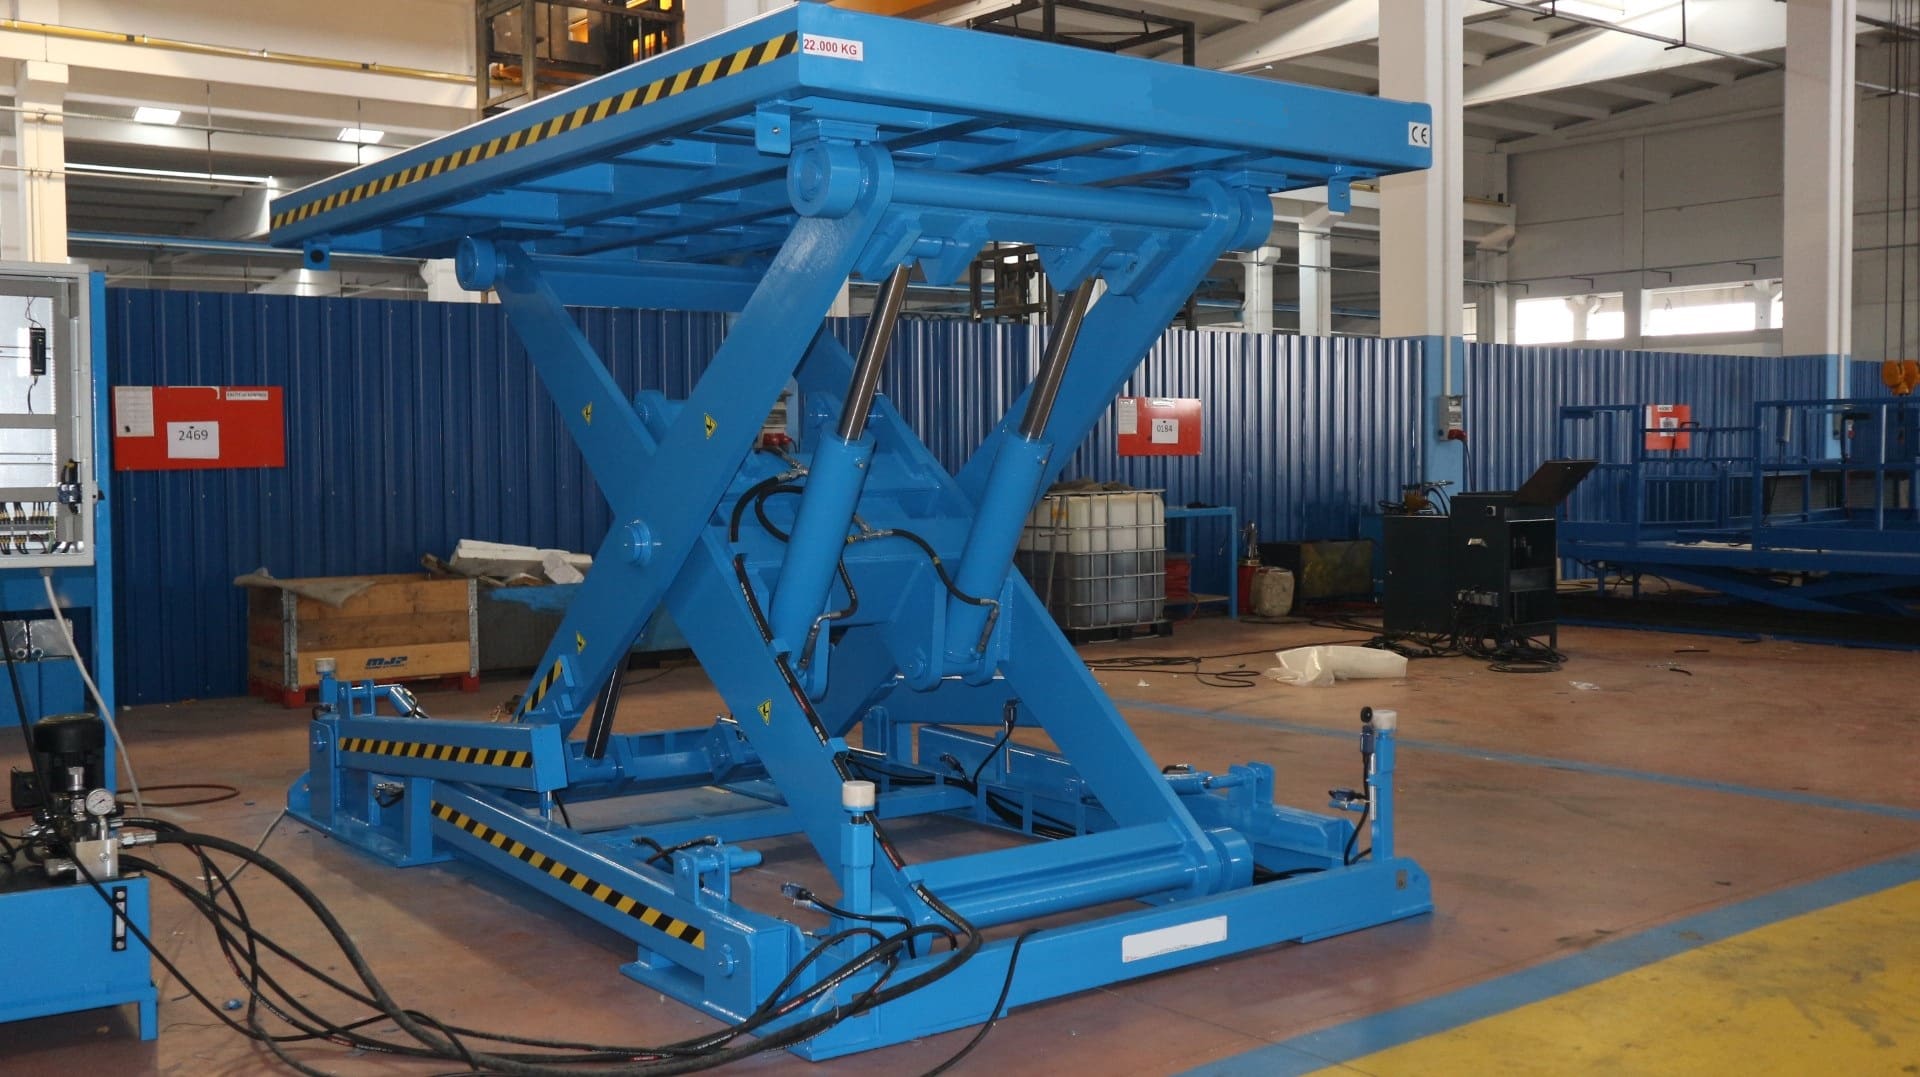 Heavy-duty lifting table with a load capacity of 22 tons